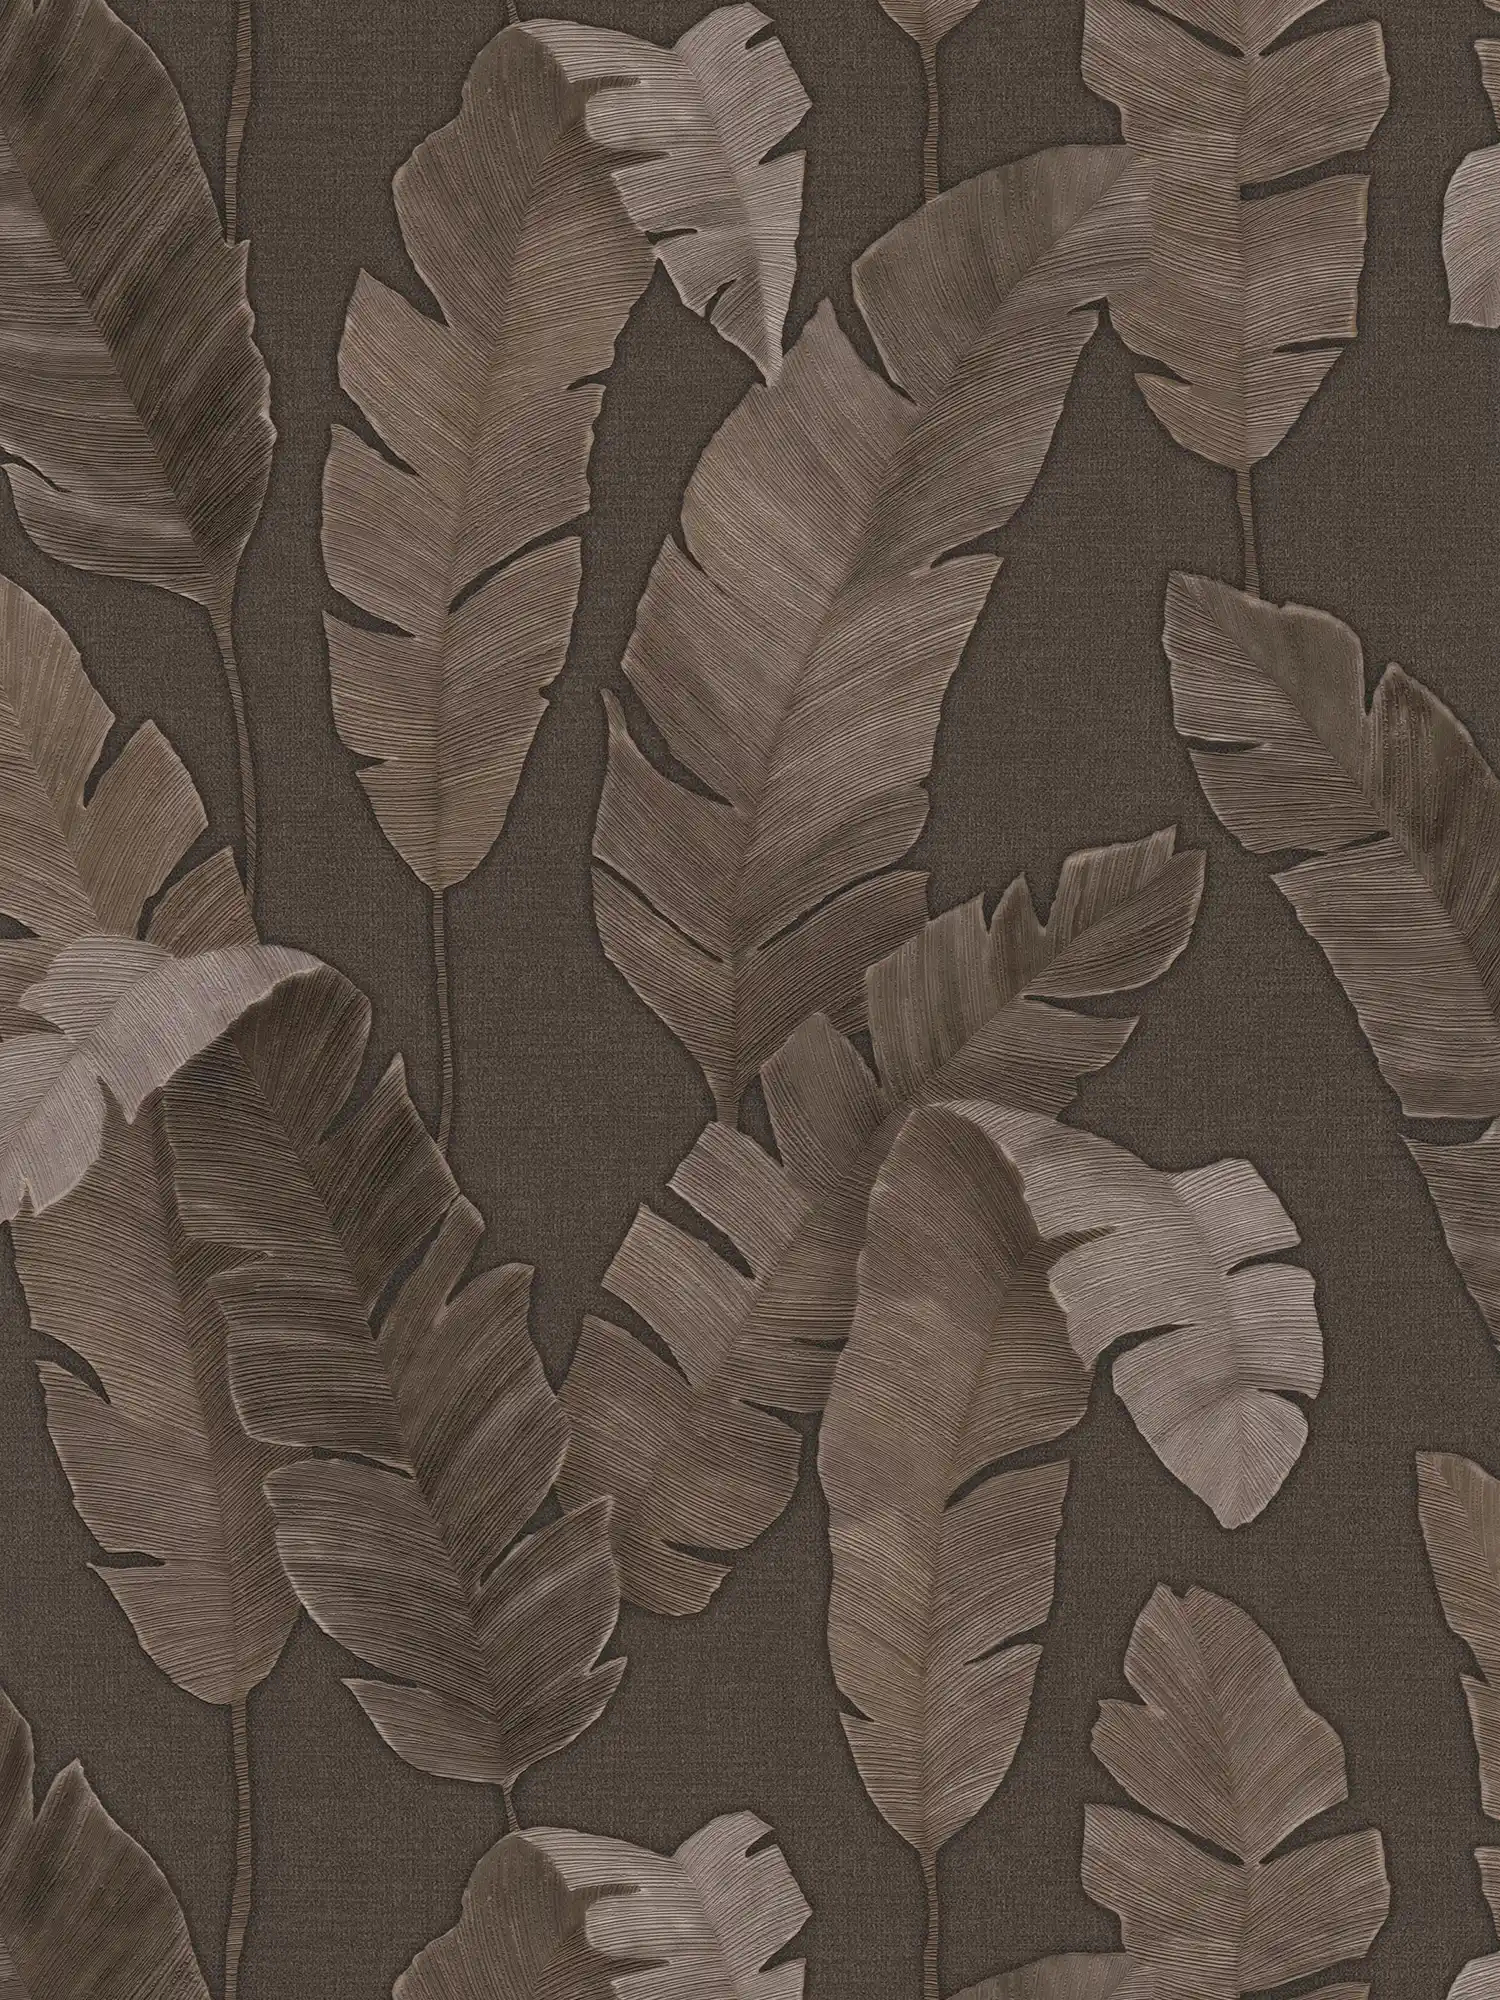 Jungle Wallpaper with Light Shiny Palm Leaves - Brown
